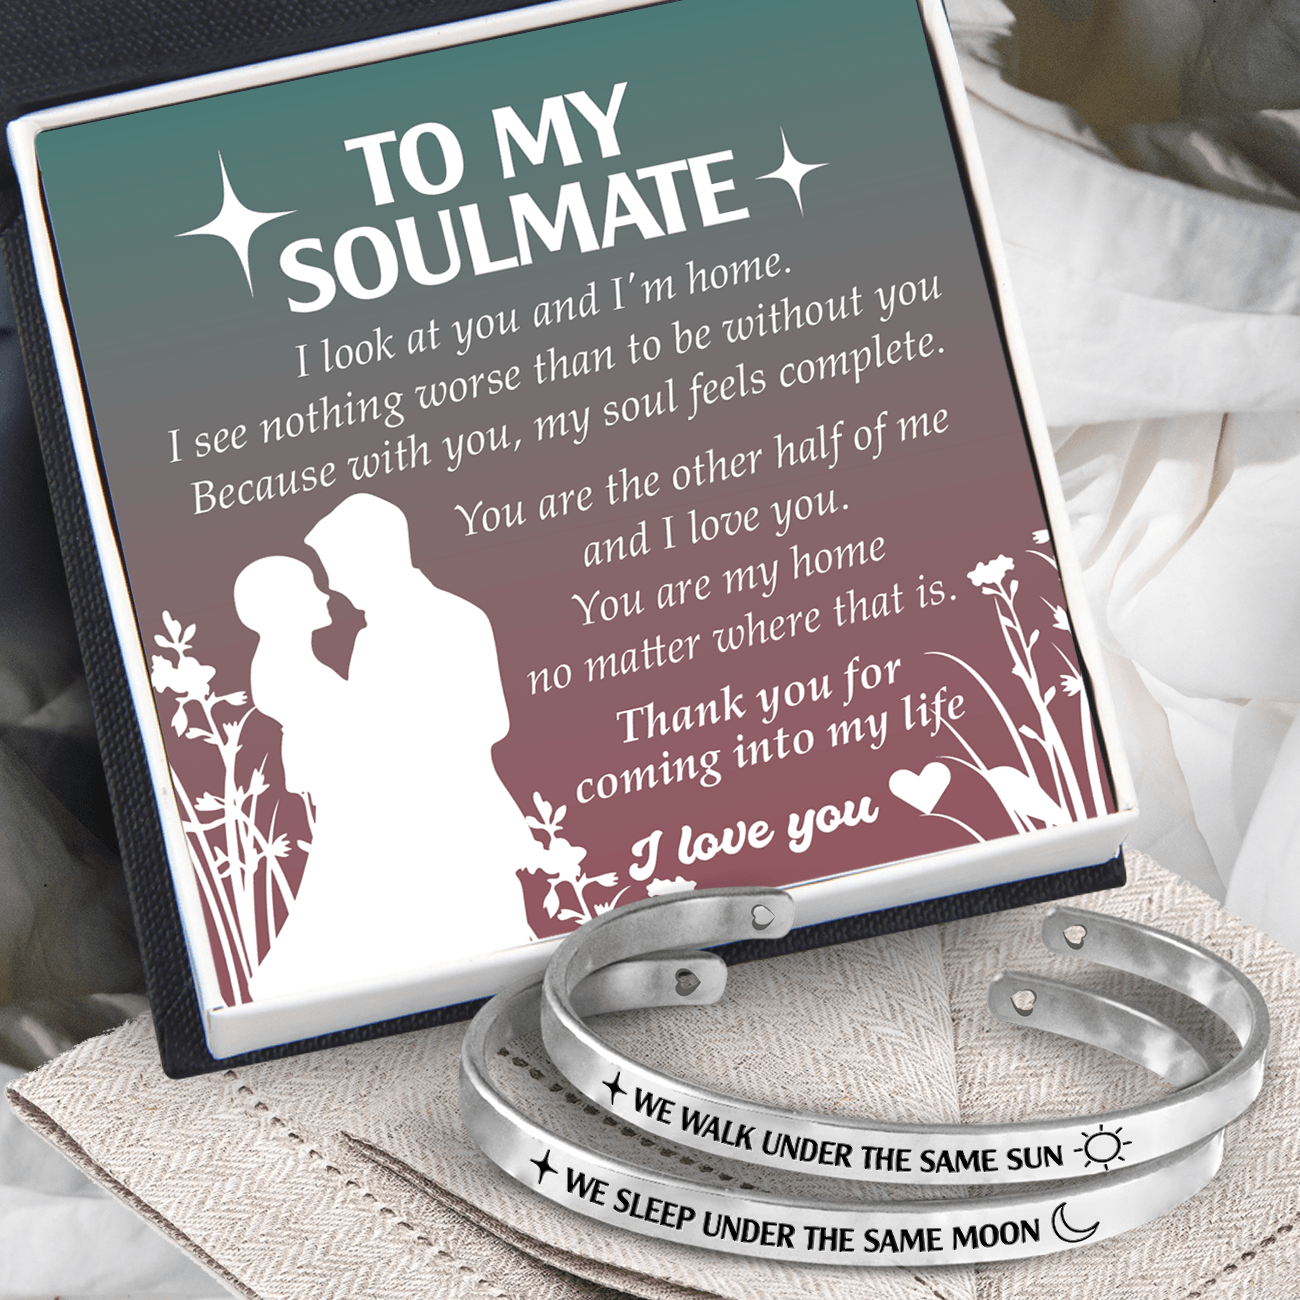 Couple Bracelets - Family - To My Soulmate - Thank You For Coming Into My Life - Augbt15001 - Gifts Holder